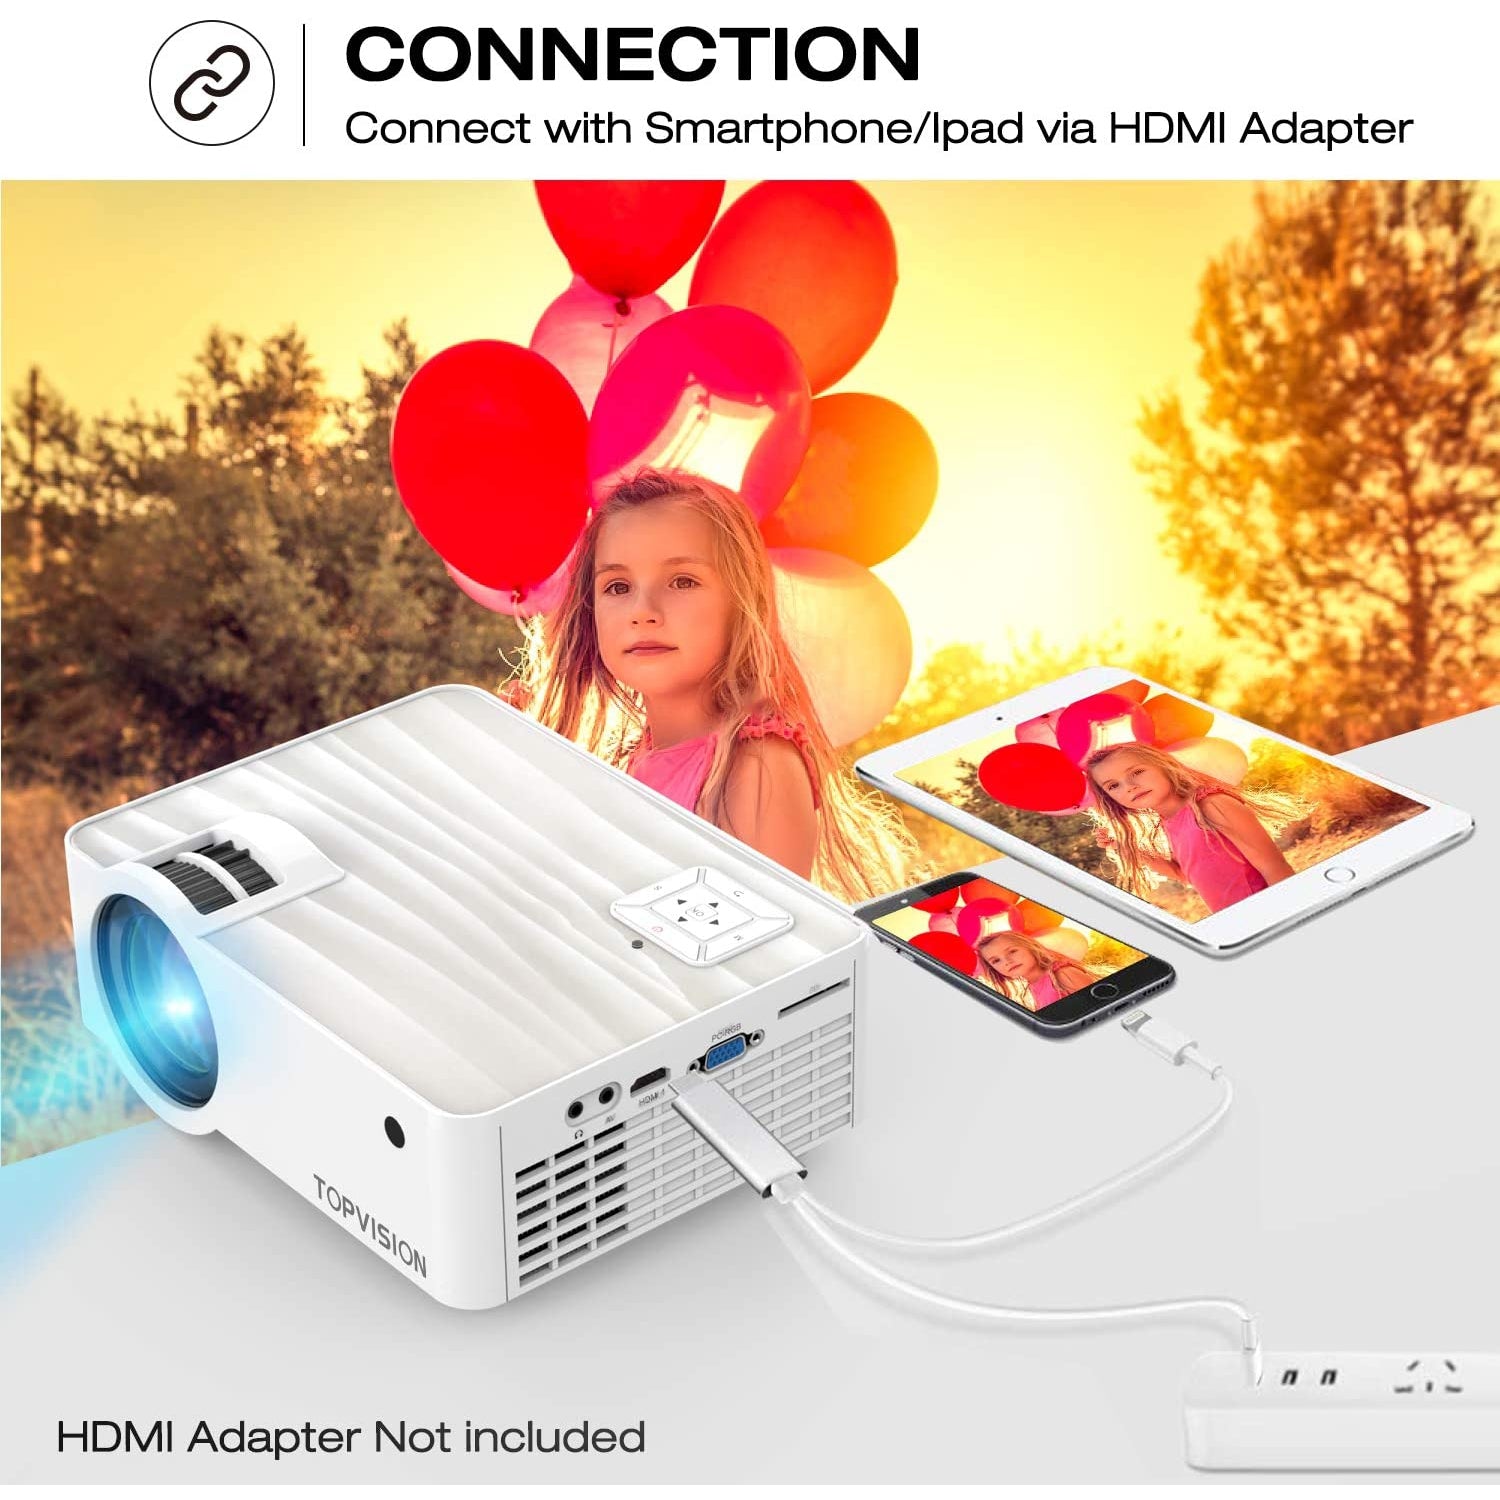 Top Vision 6500L Portable Mini Projector 100”, 1080P Supported